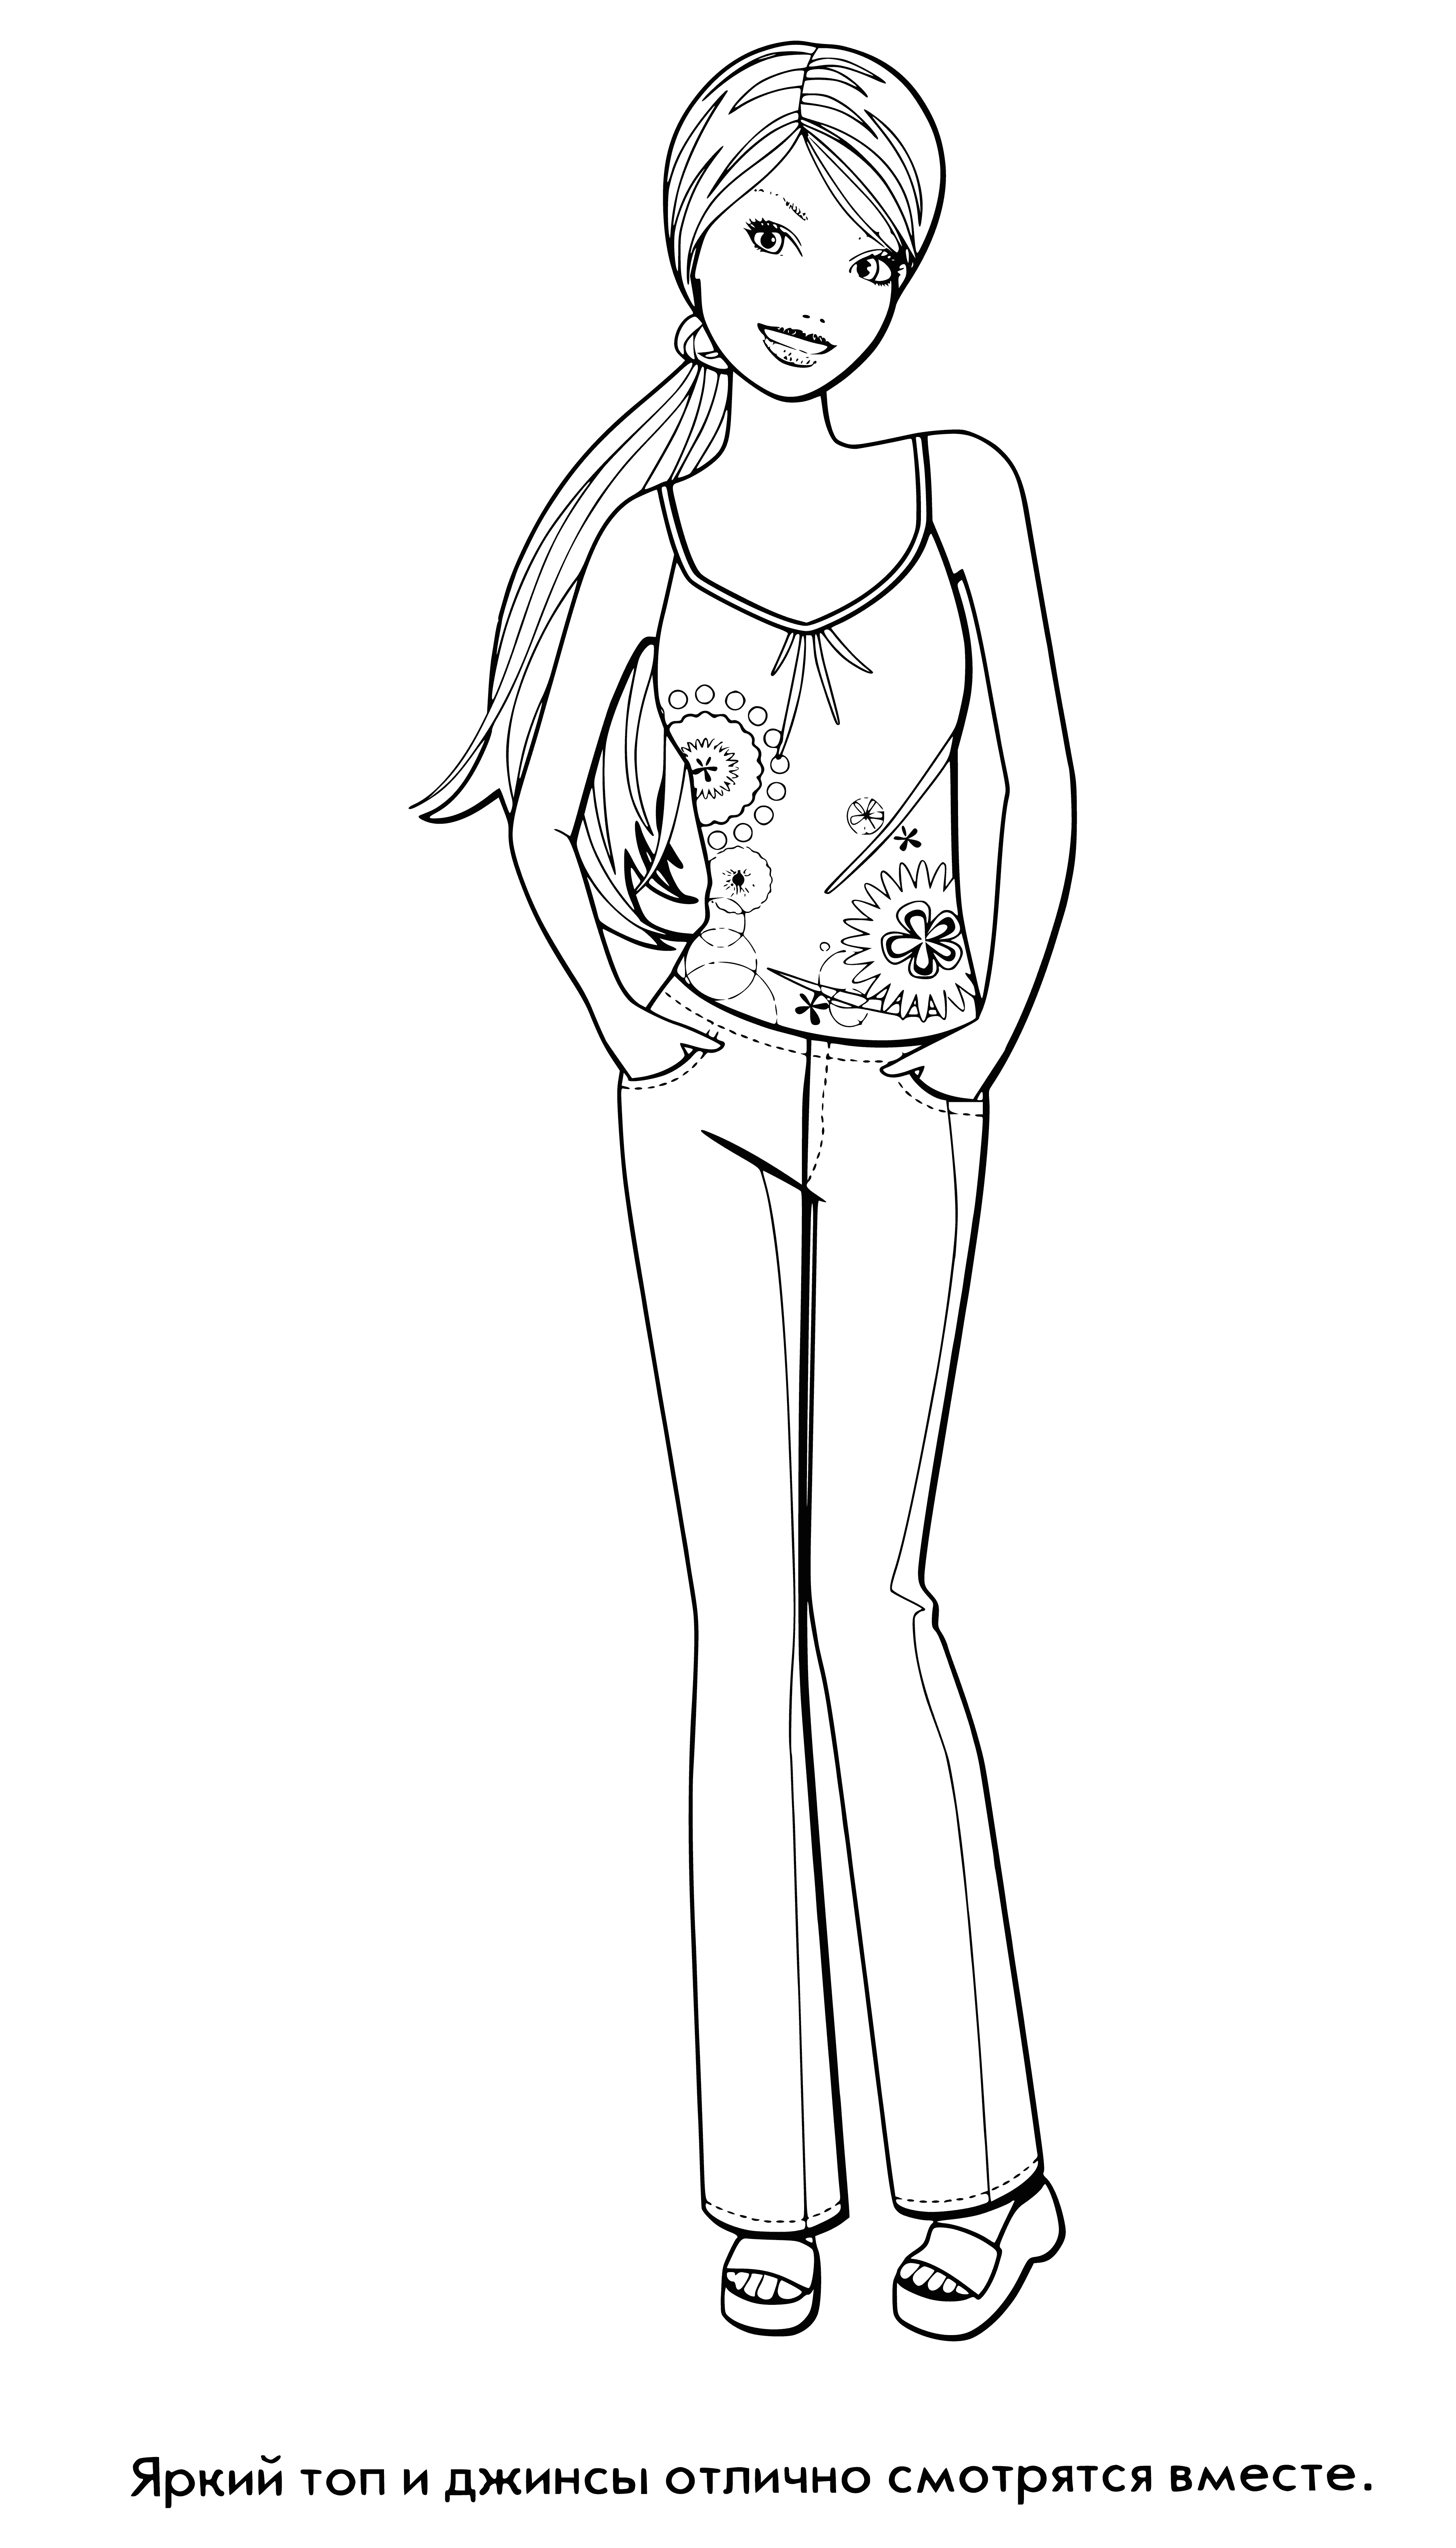 coloring page: Barbie stands on a pink/purple rectangle with a pink shirt & black/white checkerboard skirt. Blonde hair, blue eyes. "Barbie" written in white.